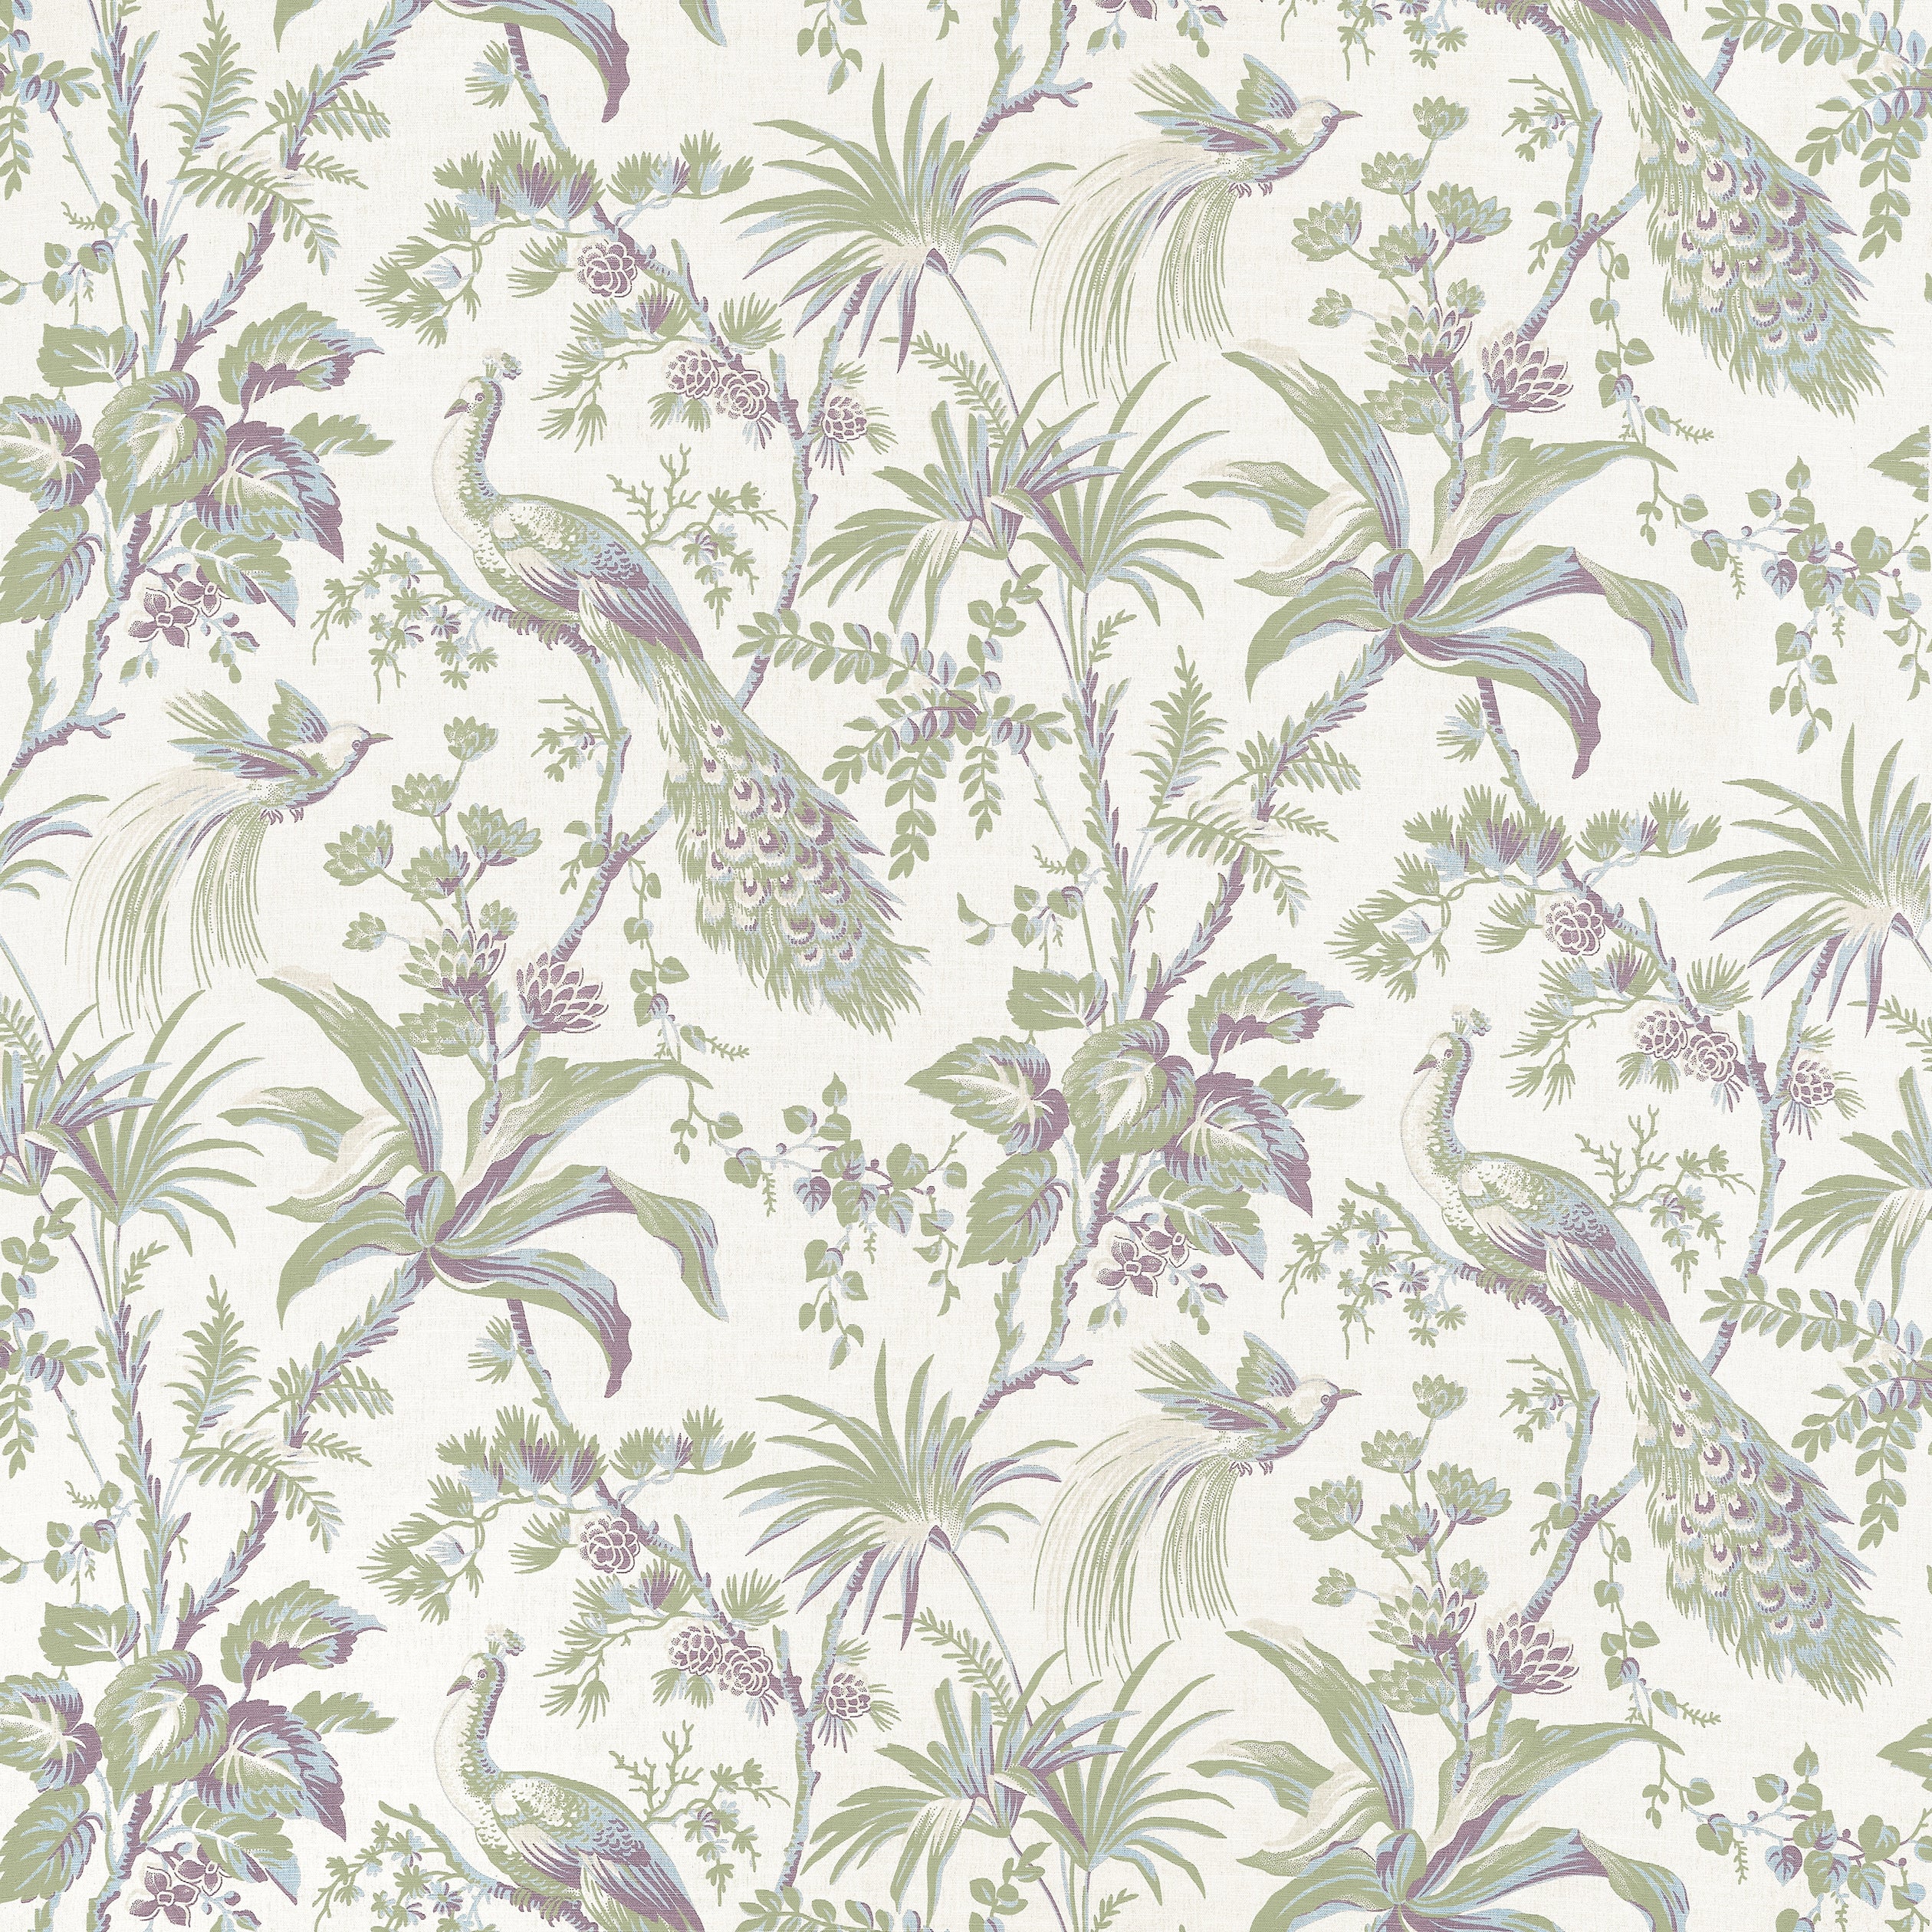 Peacock Toile fabric in green and plum color - pattern number AF57829 - by Anna French in the Bristol collection